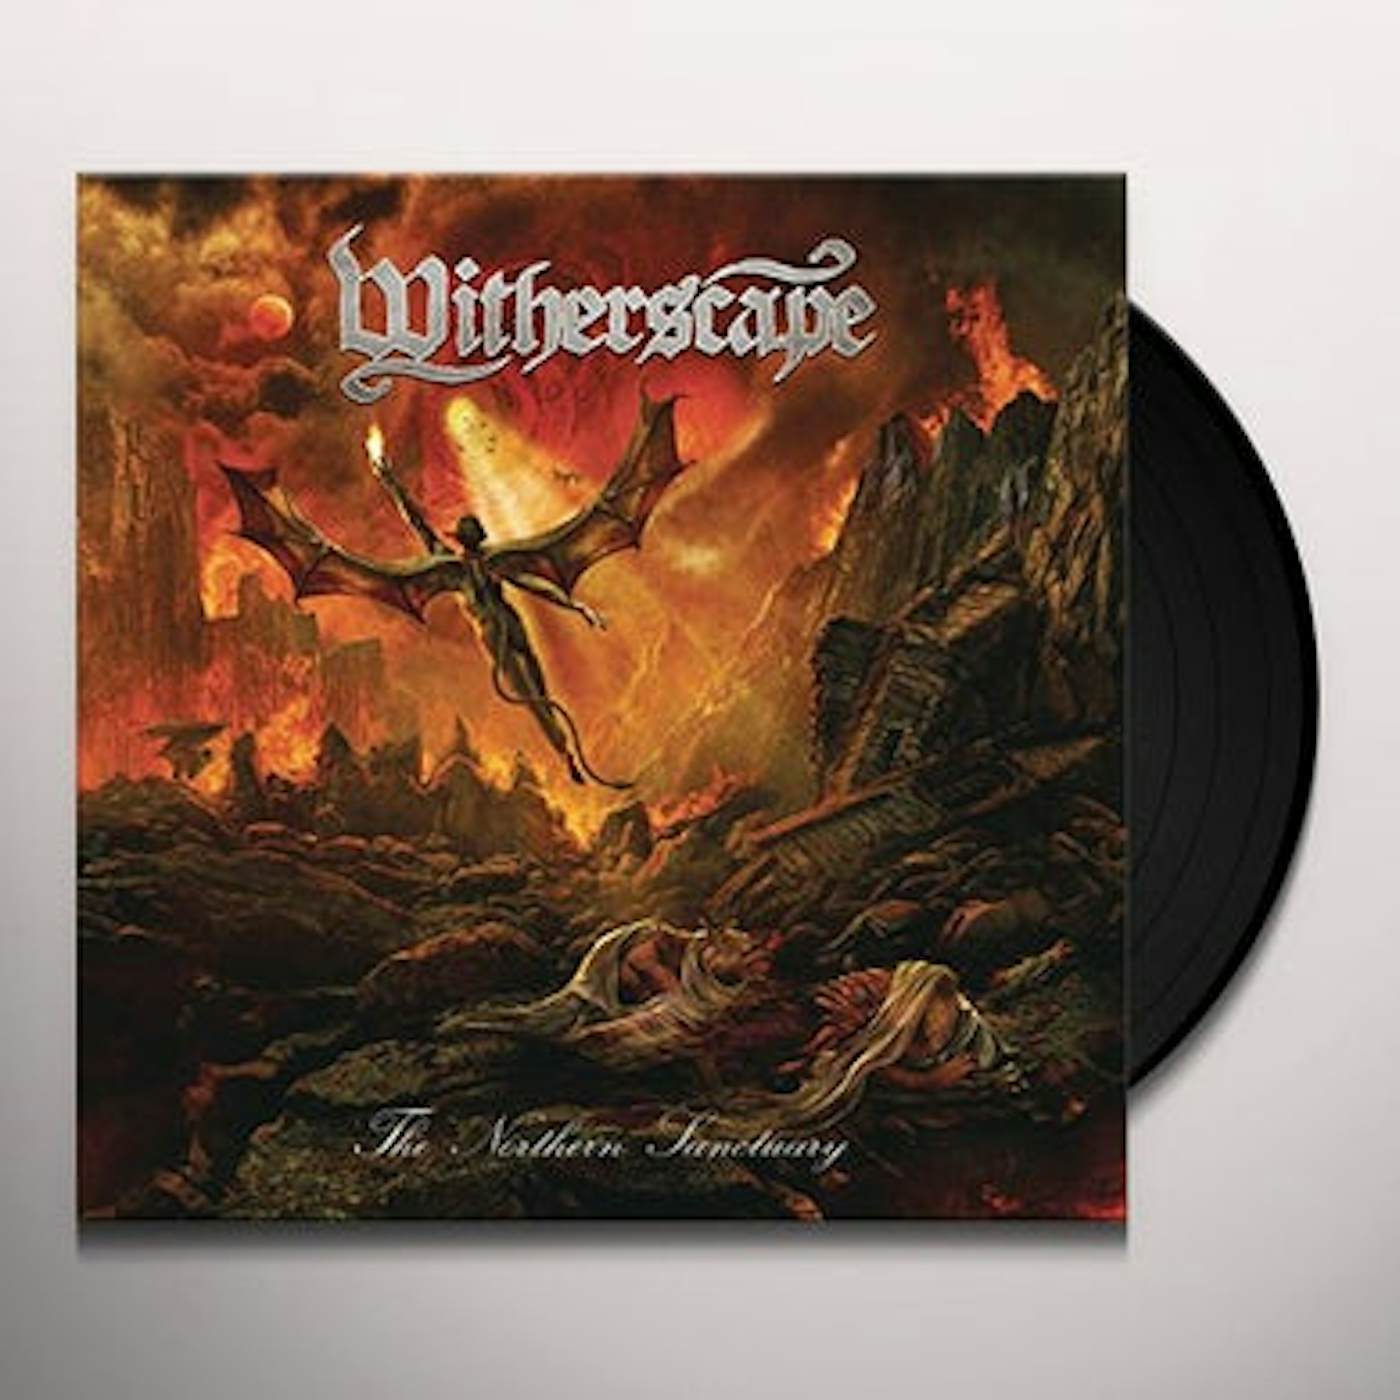 Witherscape NORTHERN SANCTUARY Vinyl Record - w/CD, Clear Vinyl, Gatefold Sleeve, Poster